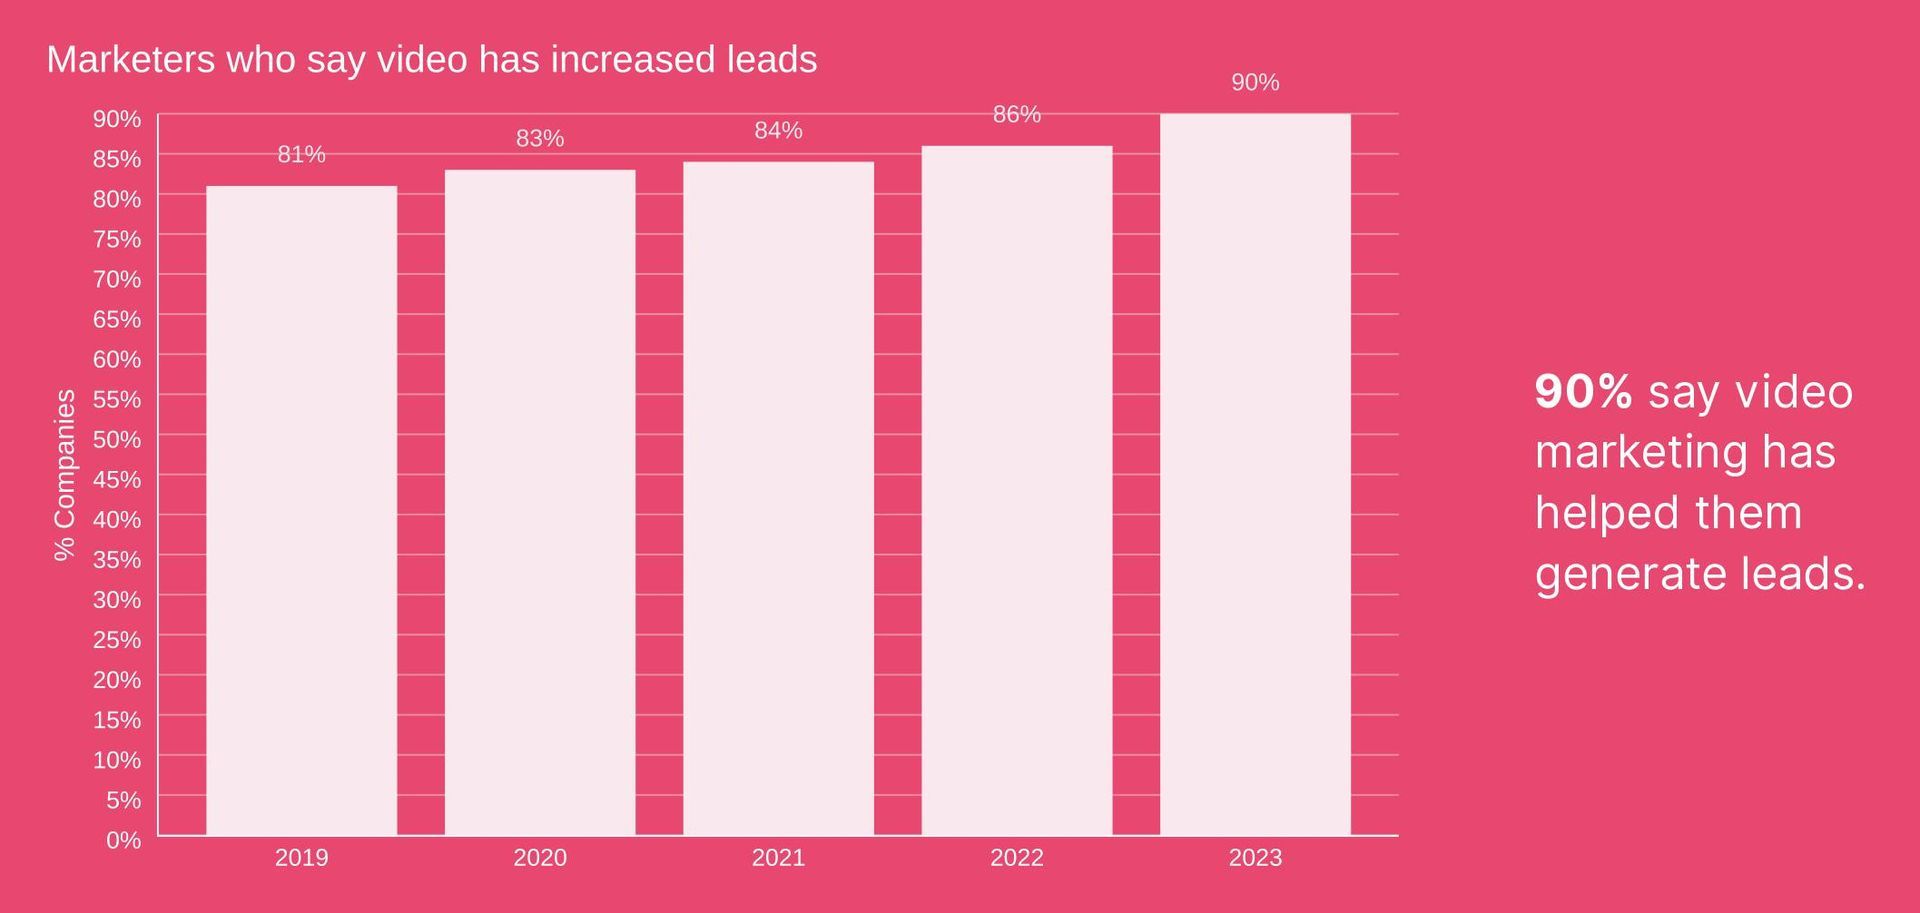 A graph showing the percentage of marketers who say video marketing has helped generate leads, from 2019-2023